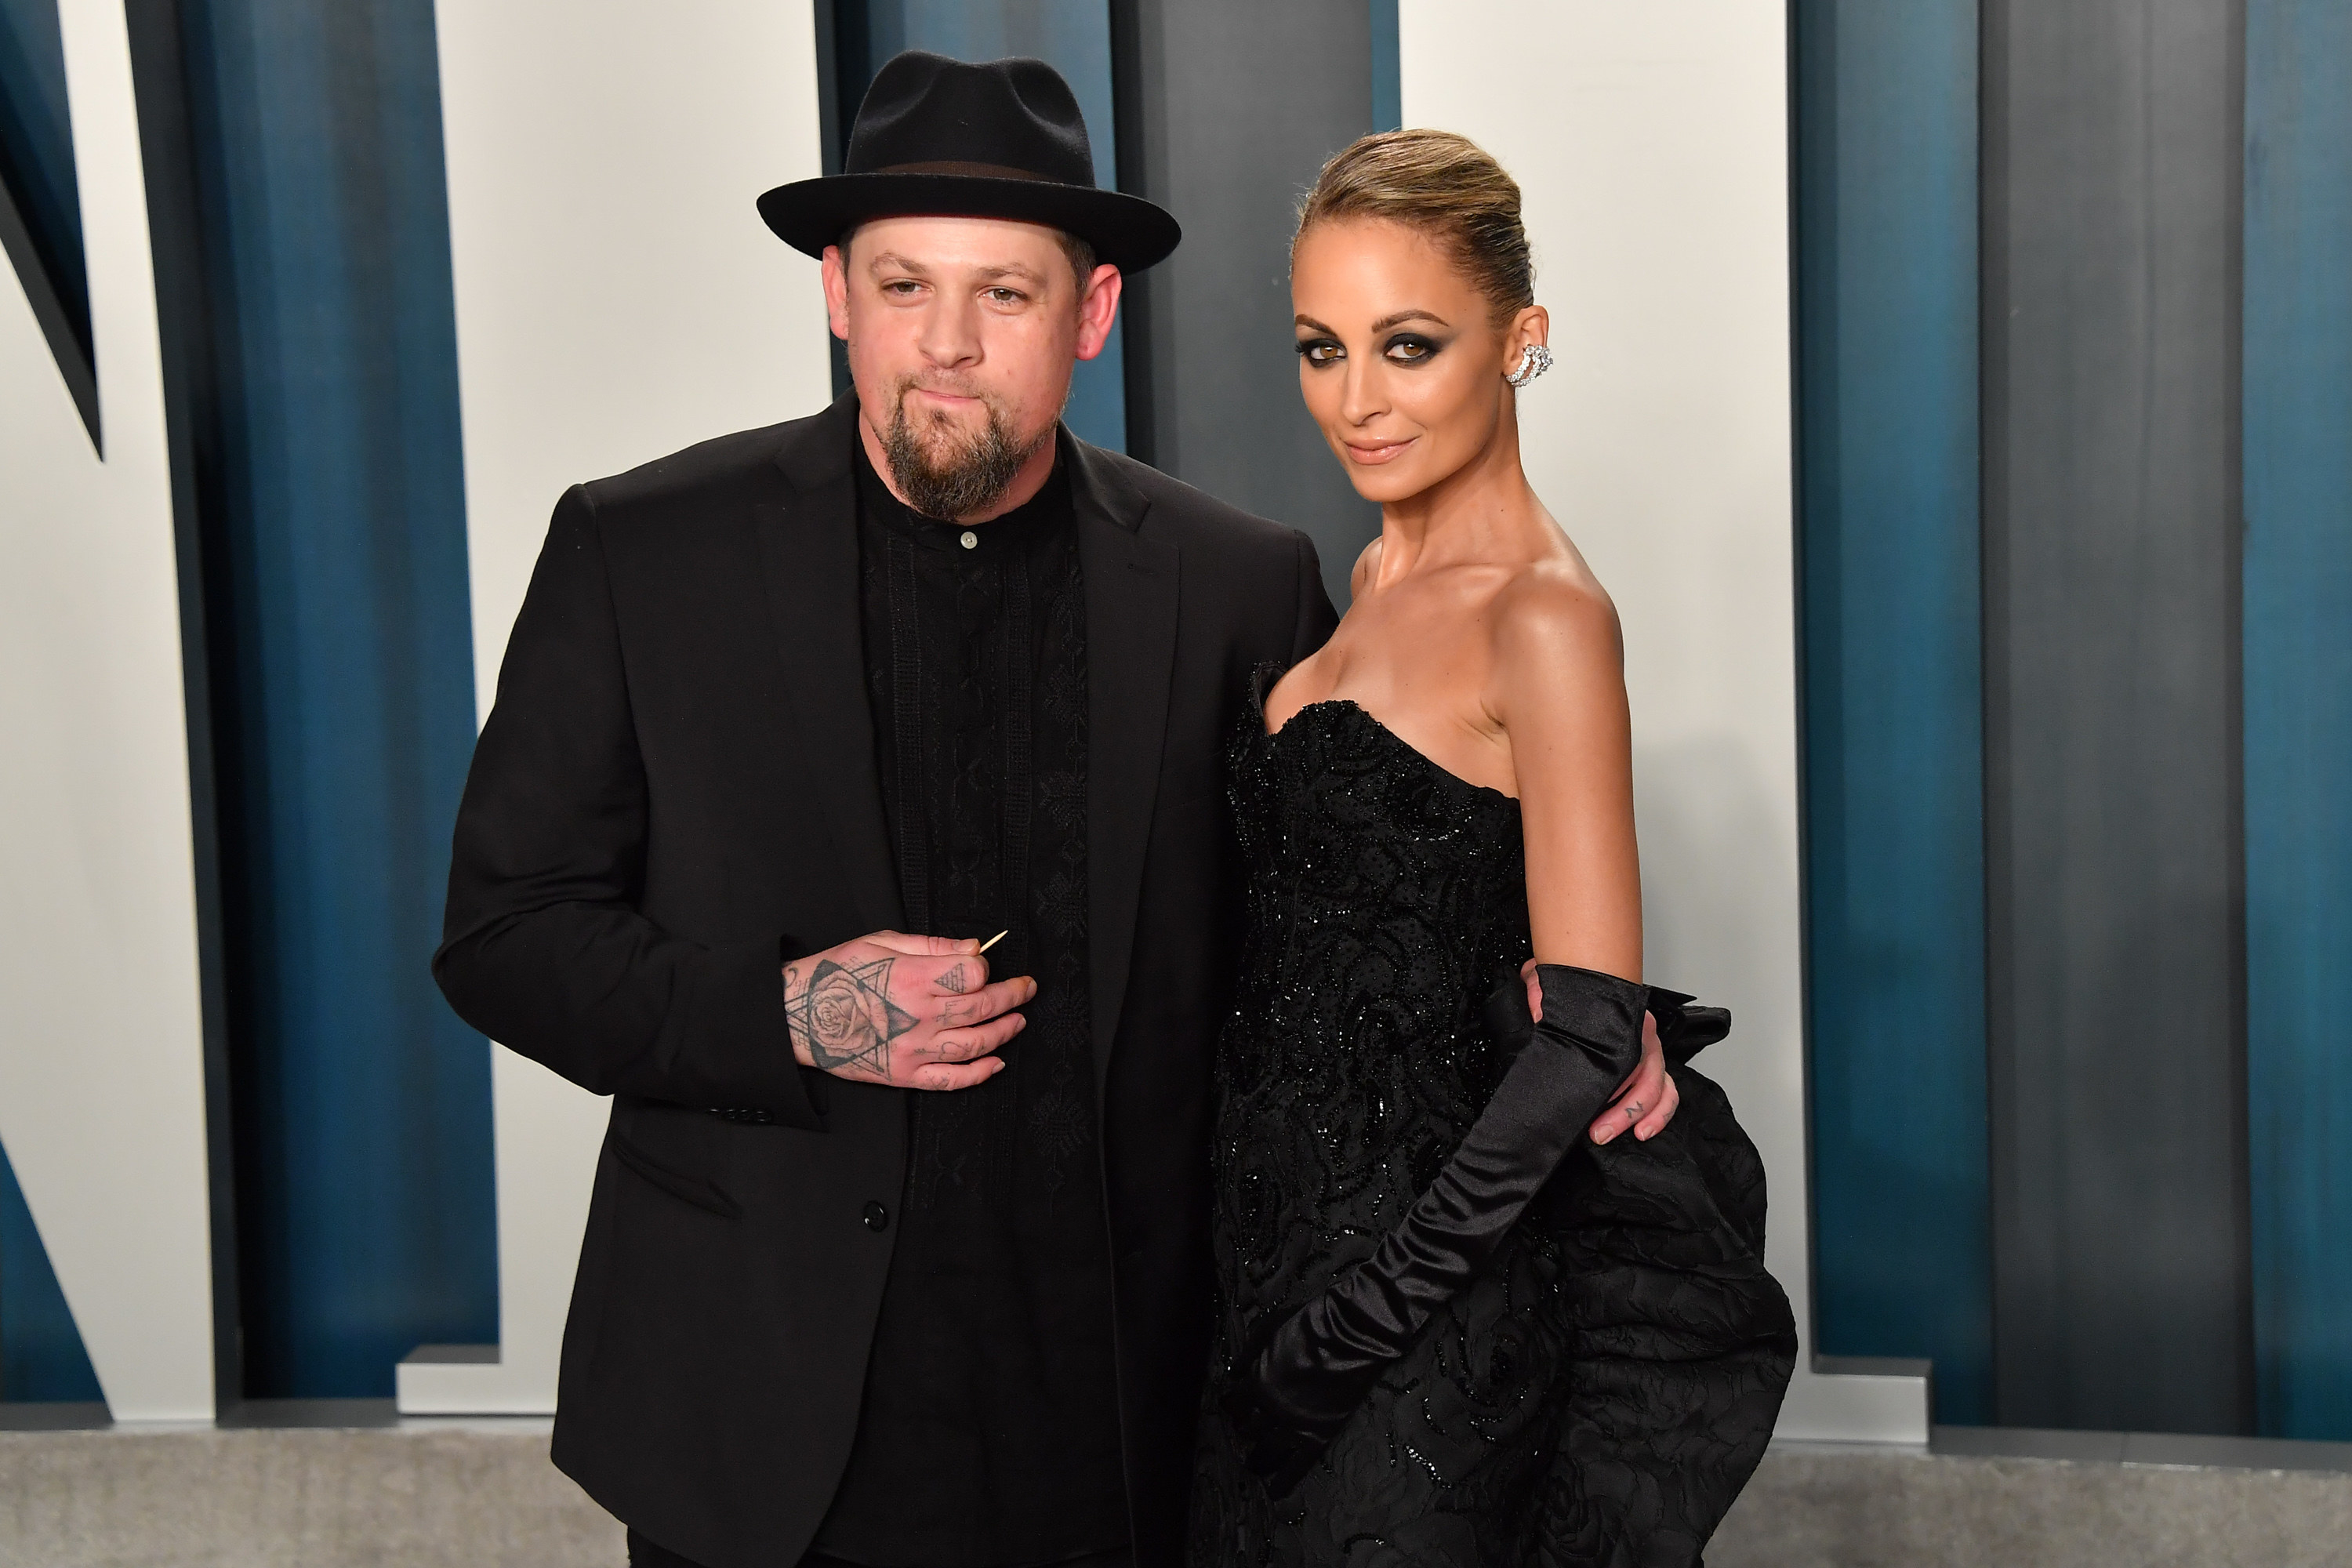 Joel Madden and Nicole Richie attend the 2020 Vanity Fair Oscar Party hosted by Radhika Jones